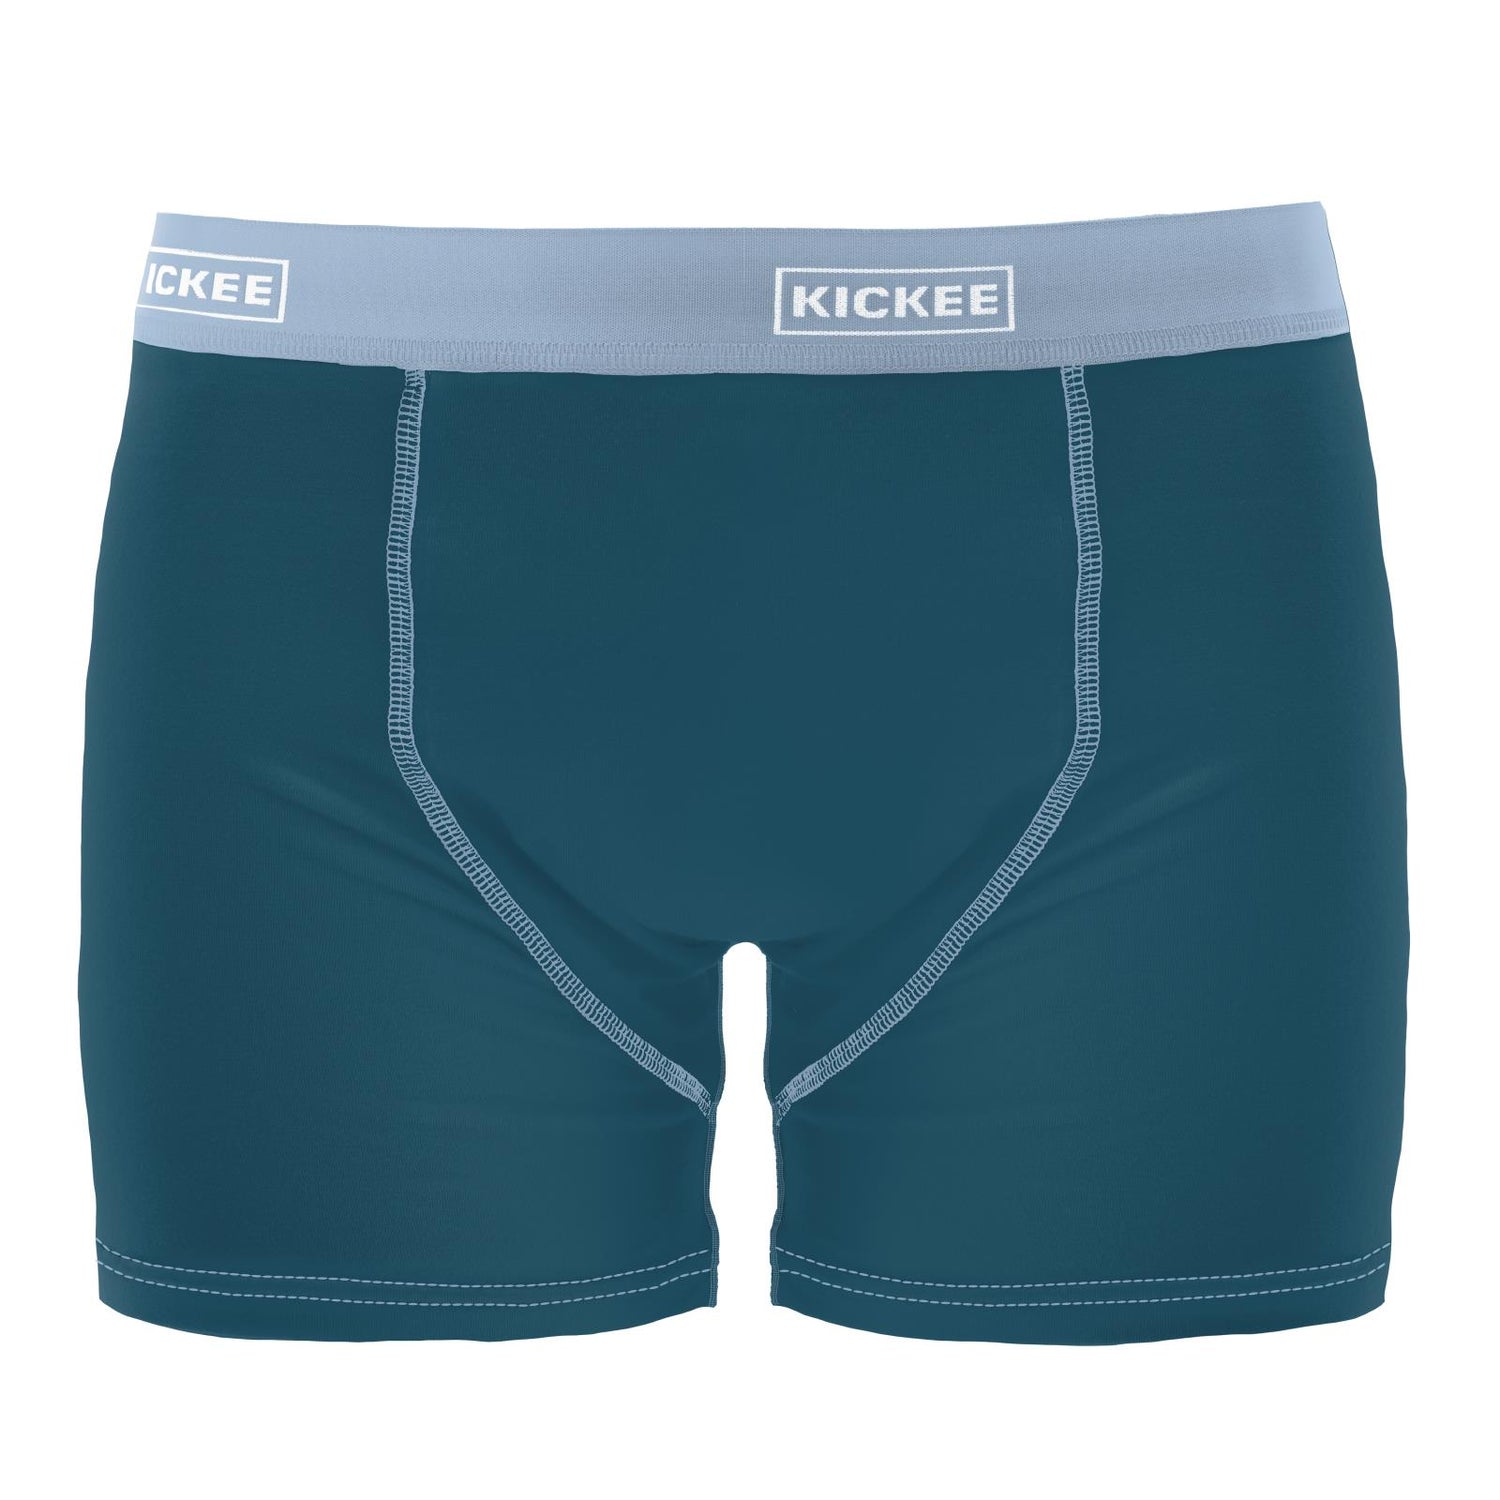 Men's Boxer Briefs in Peacock with Pond